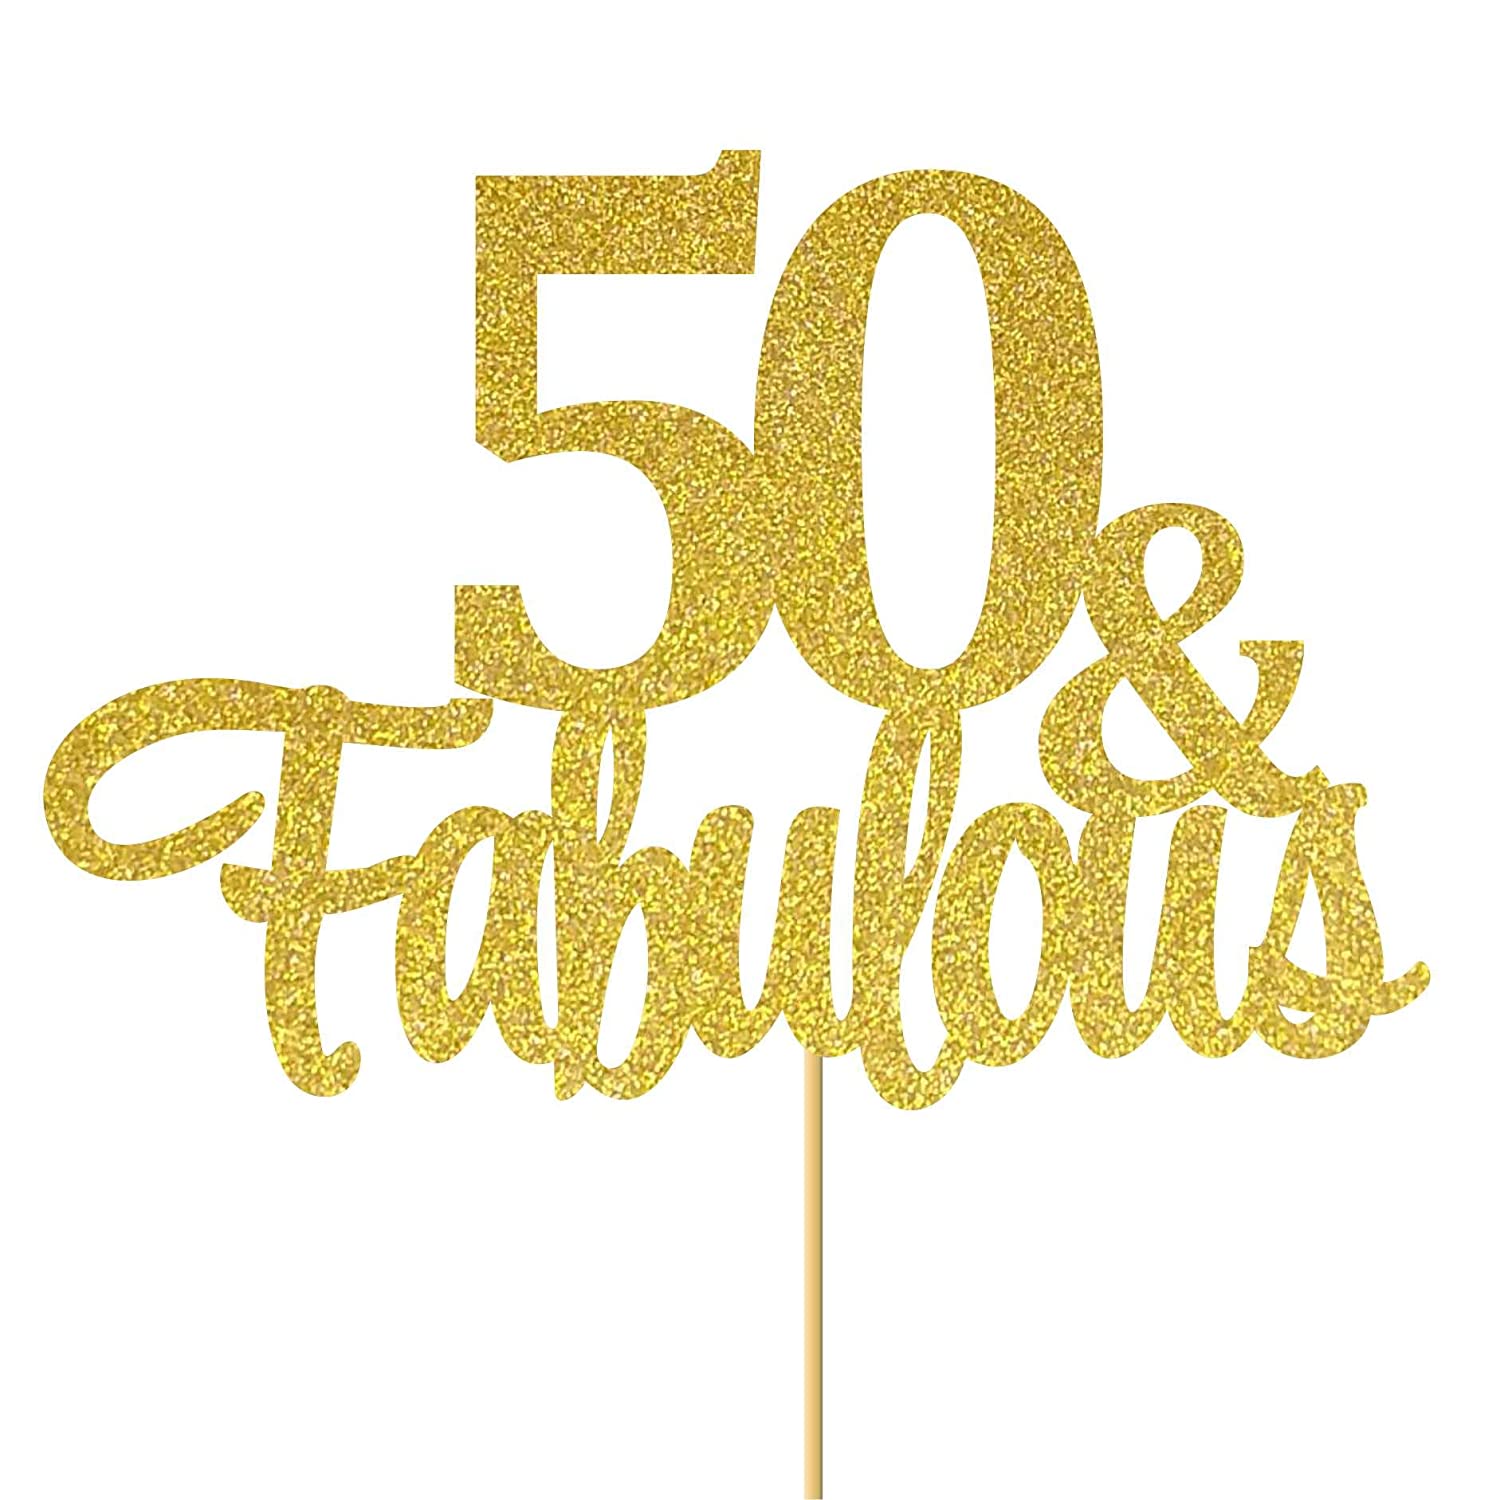 Svm Craft Gold Glitter 50 And Fabulous Cake Topper 50 Anniversary Birthday Cake Topper Party